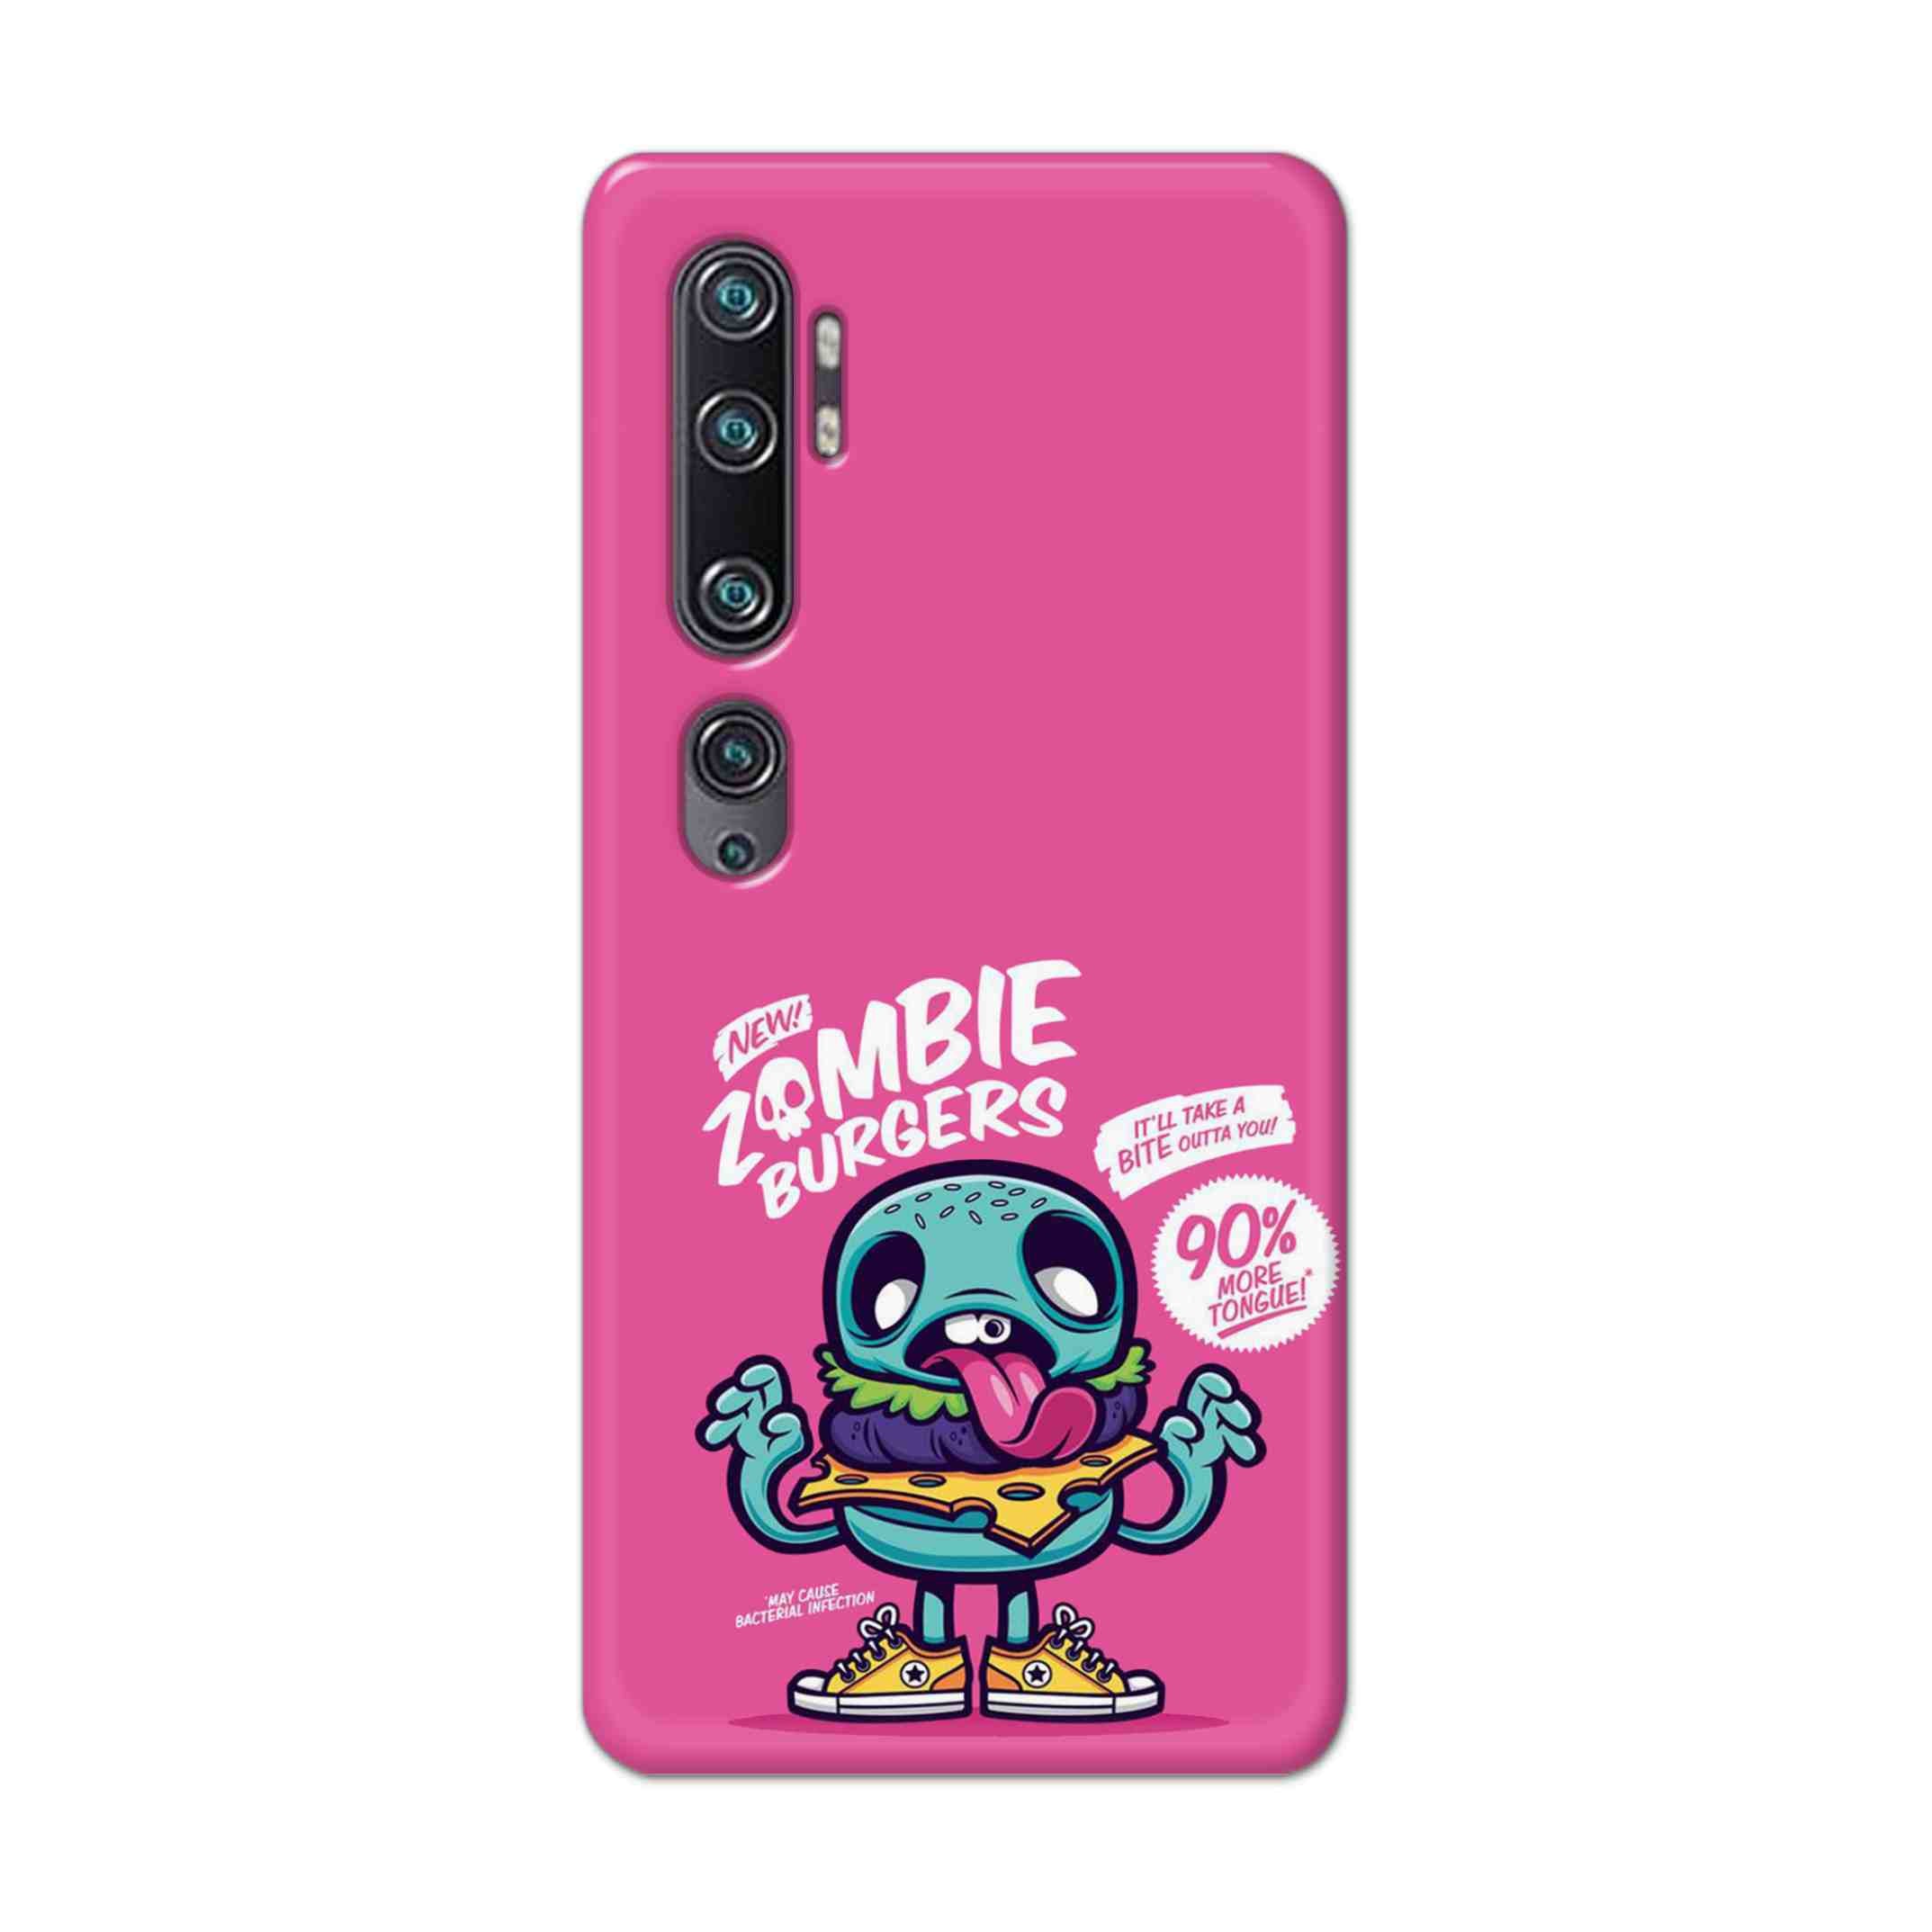 Buy New Zombie Burgers Hard Back Mobile Phone Case Cover For Xiaomi Mi Note 10 Online